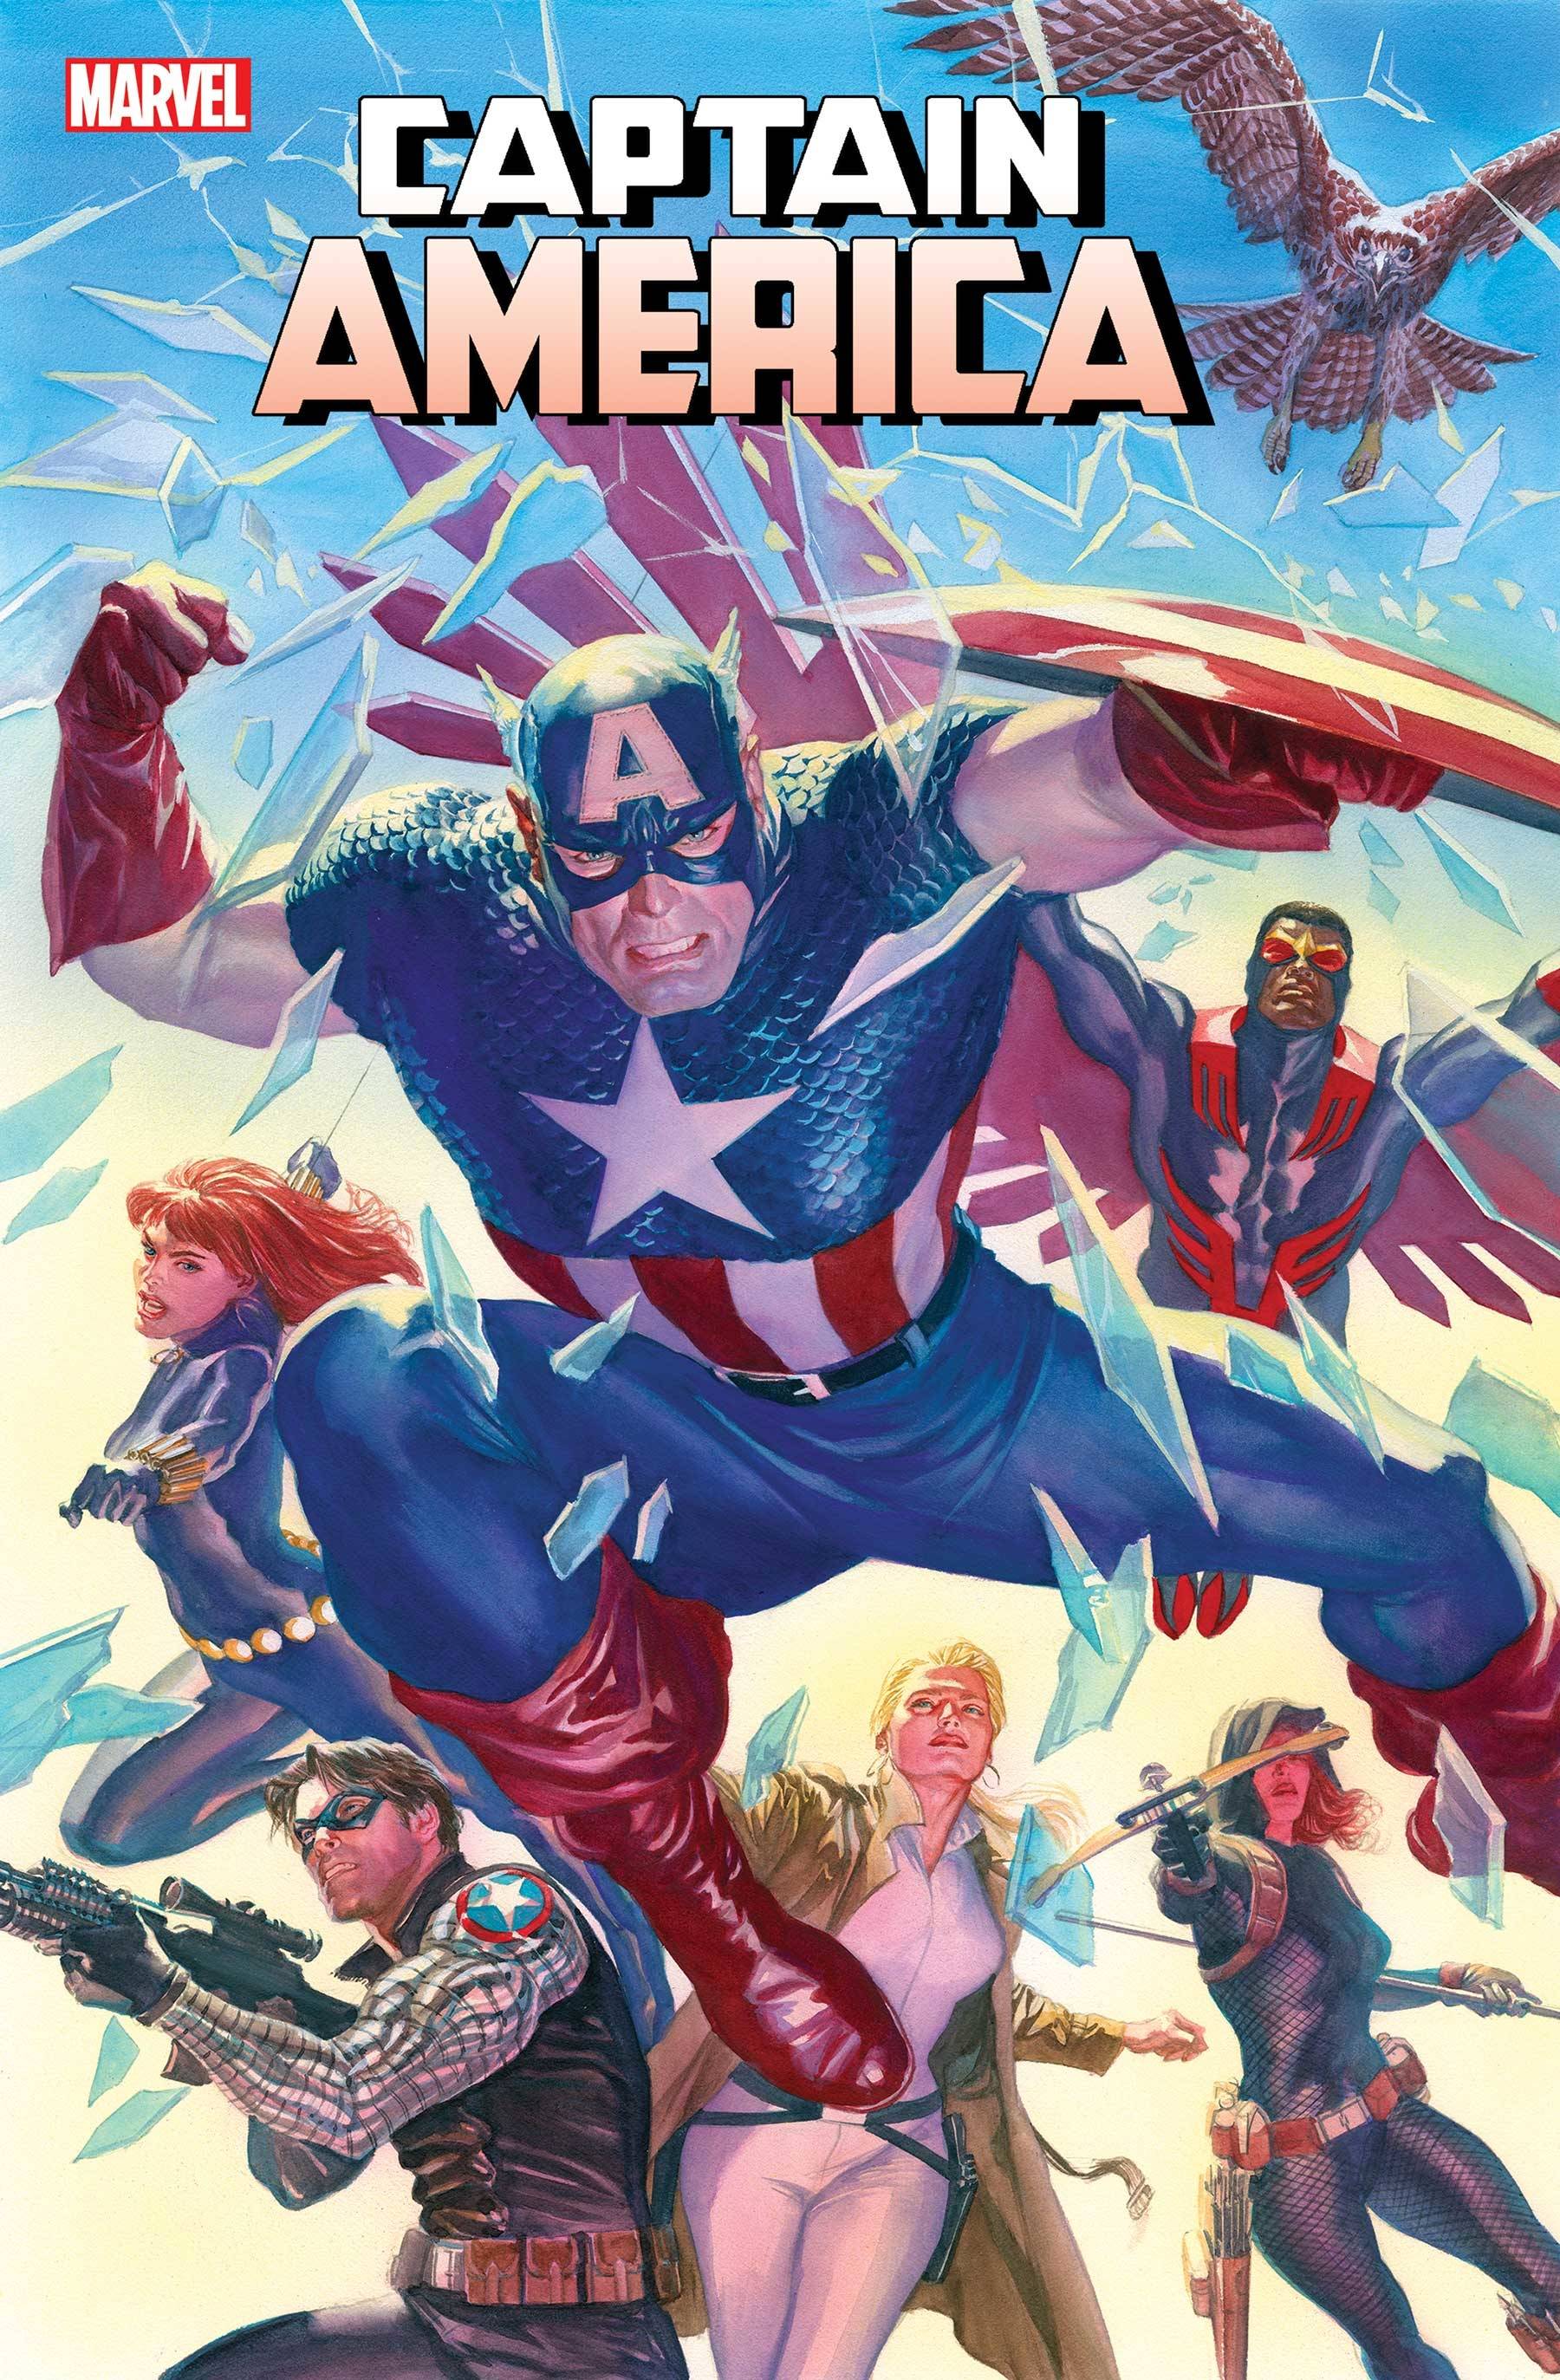 CAPTAIN AMERICA #25 BY ALEX ROSS POSTER